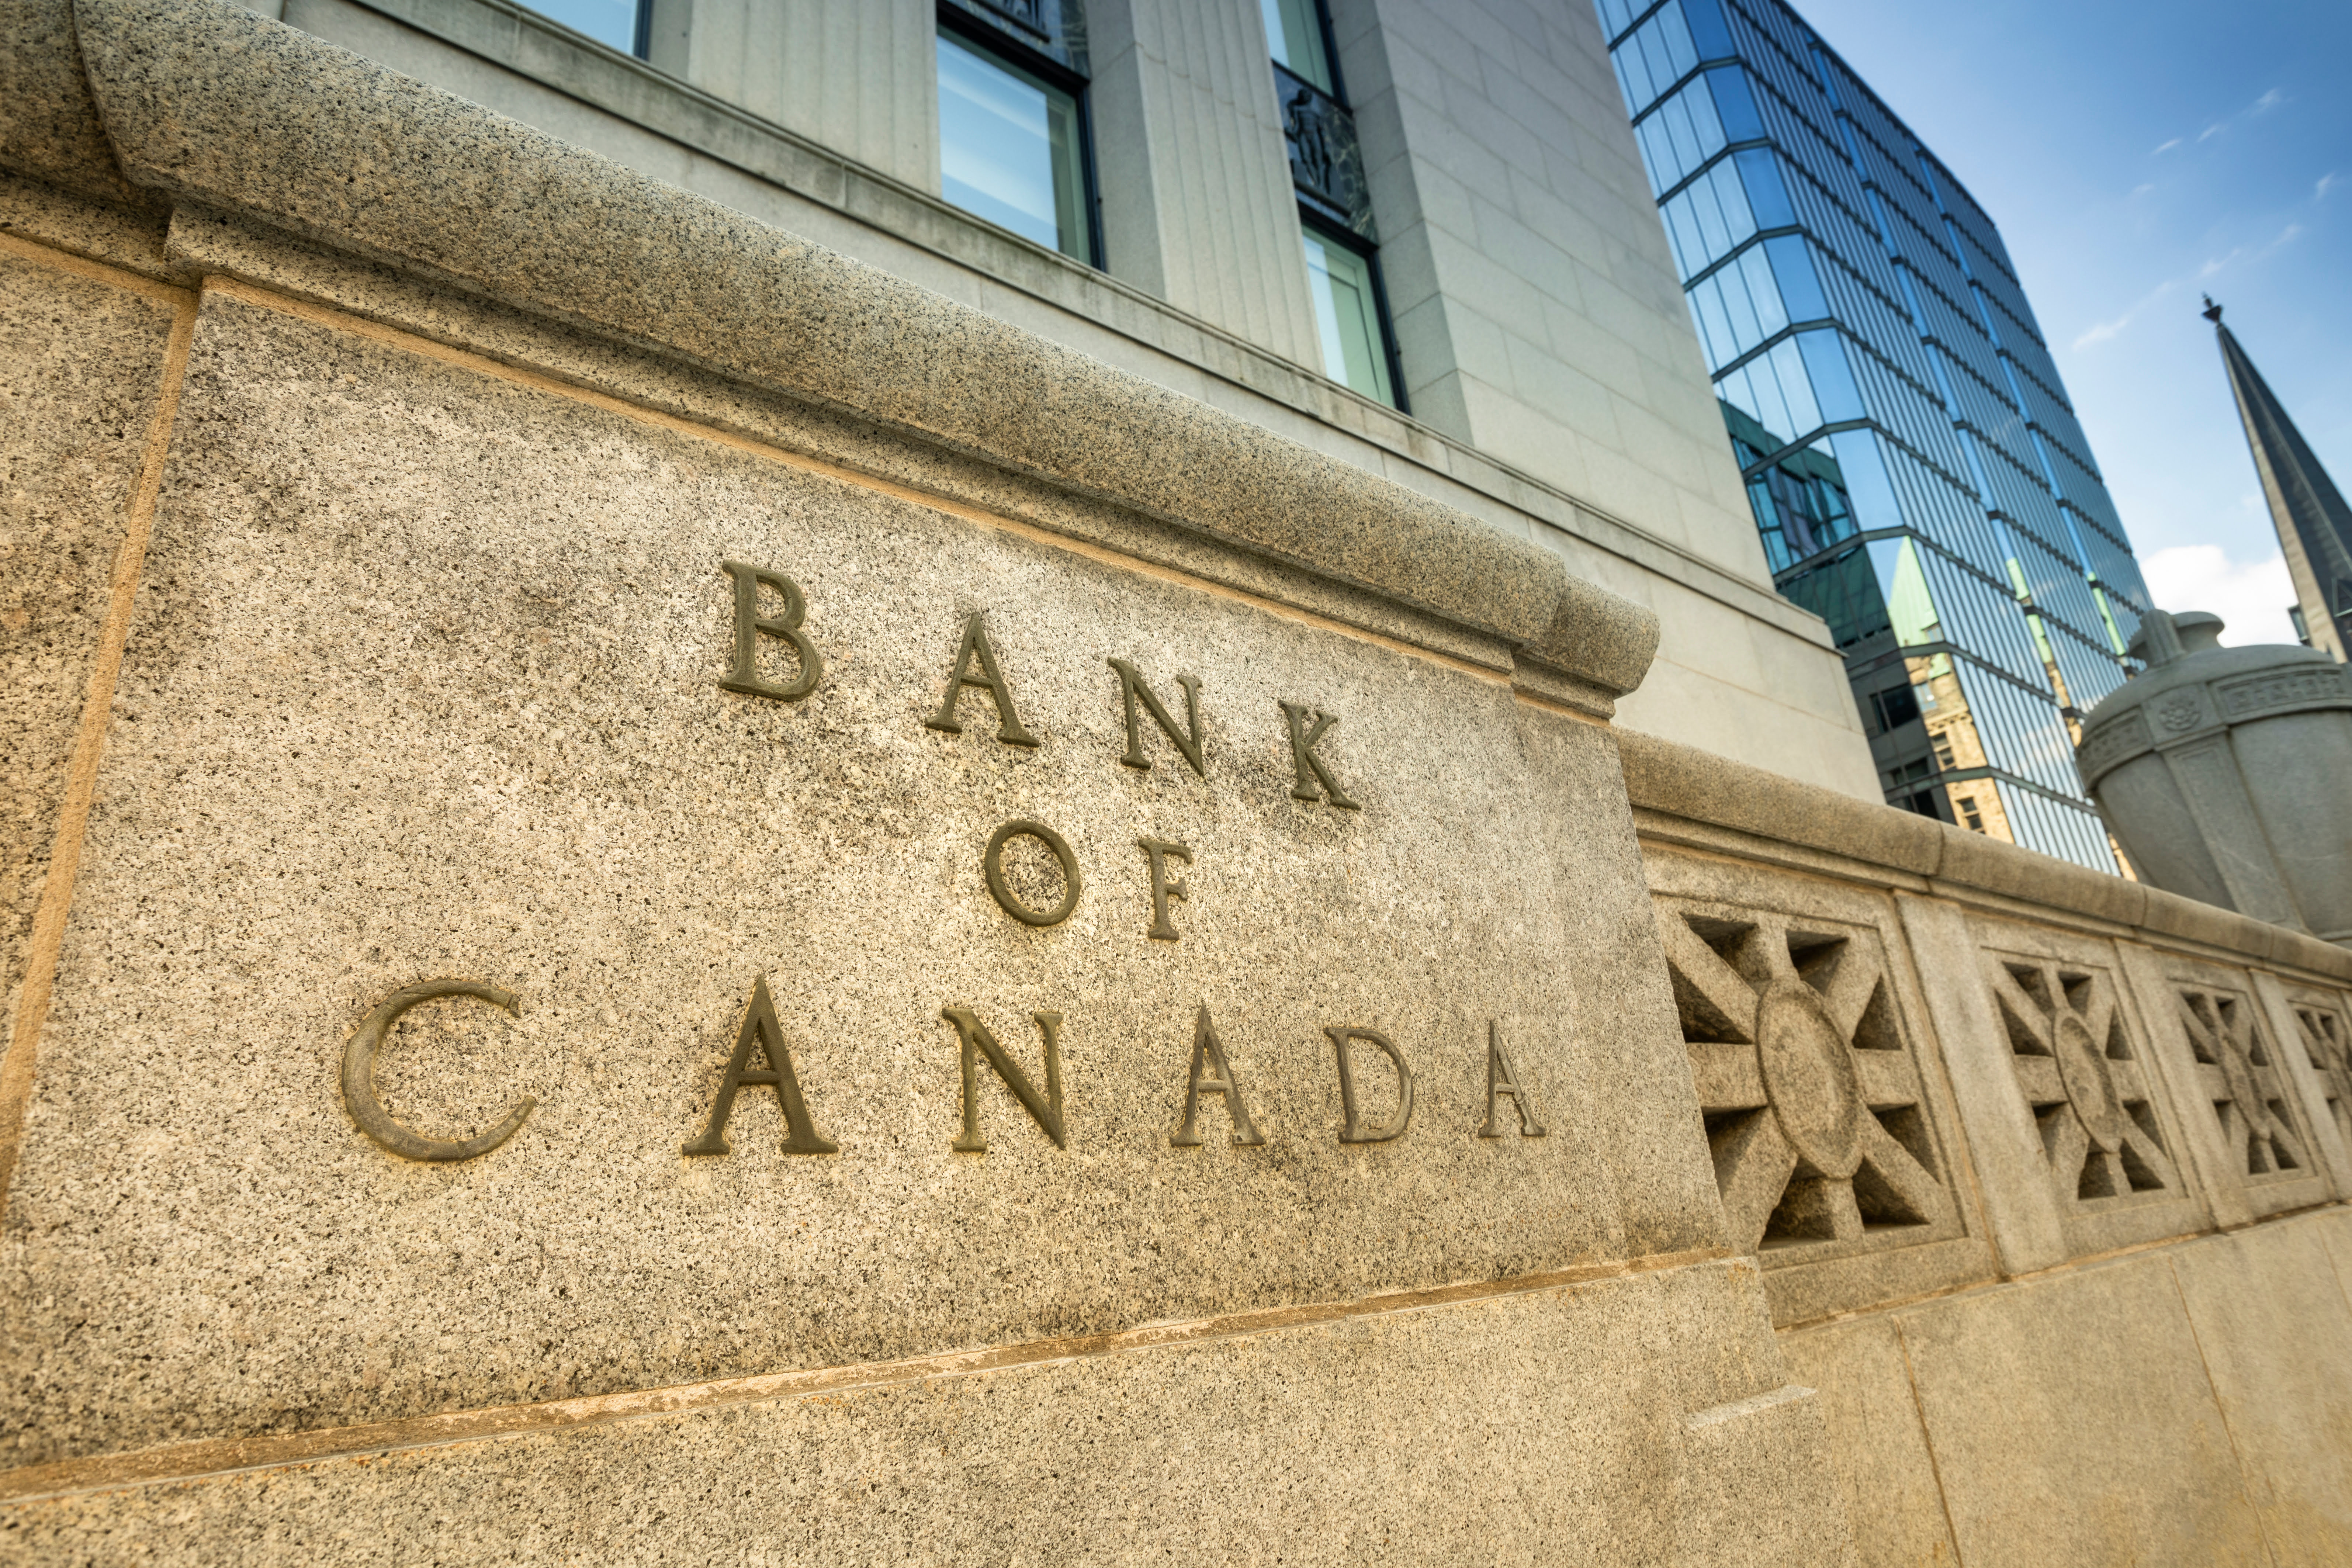  bank cryptocurrency national canada bitcoin warms development 